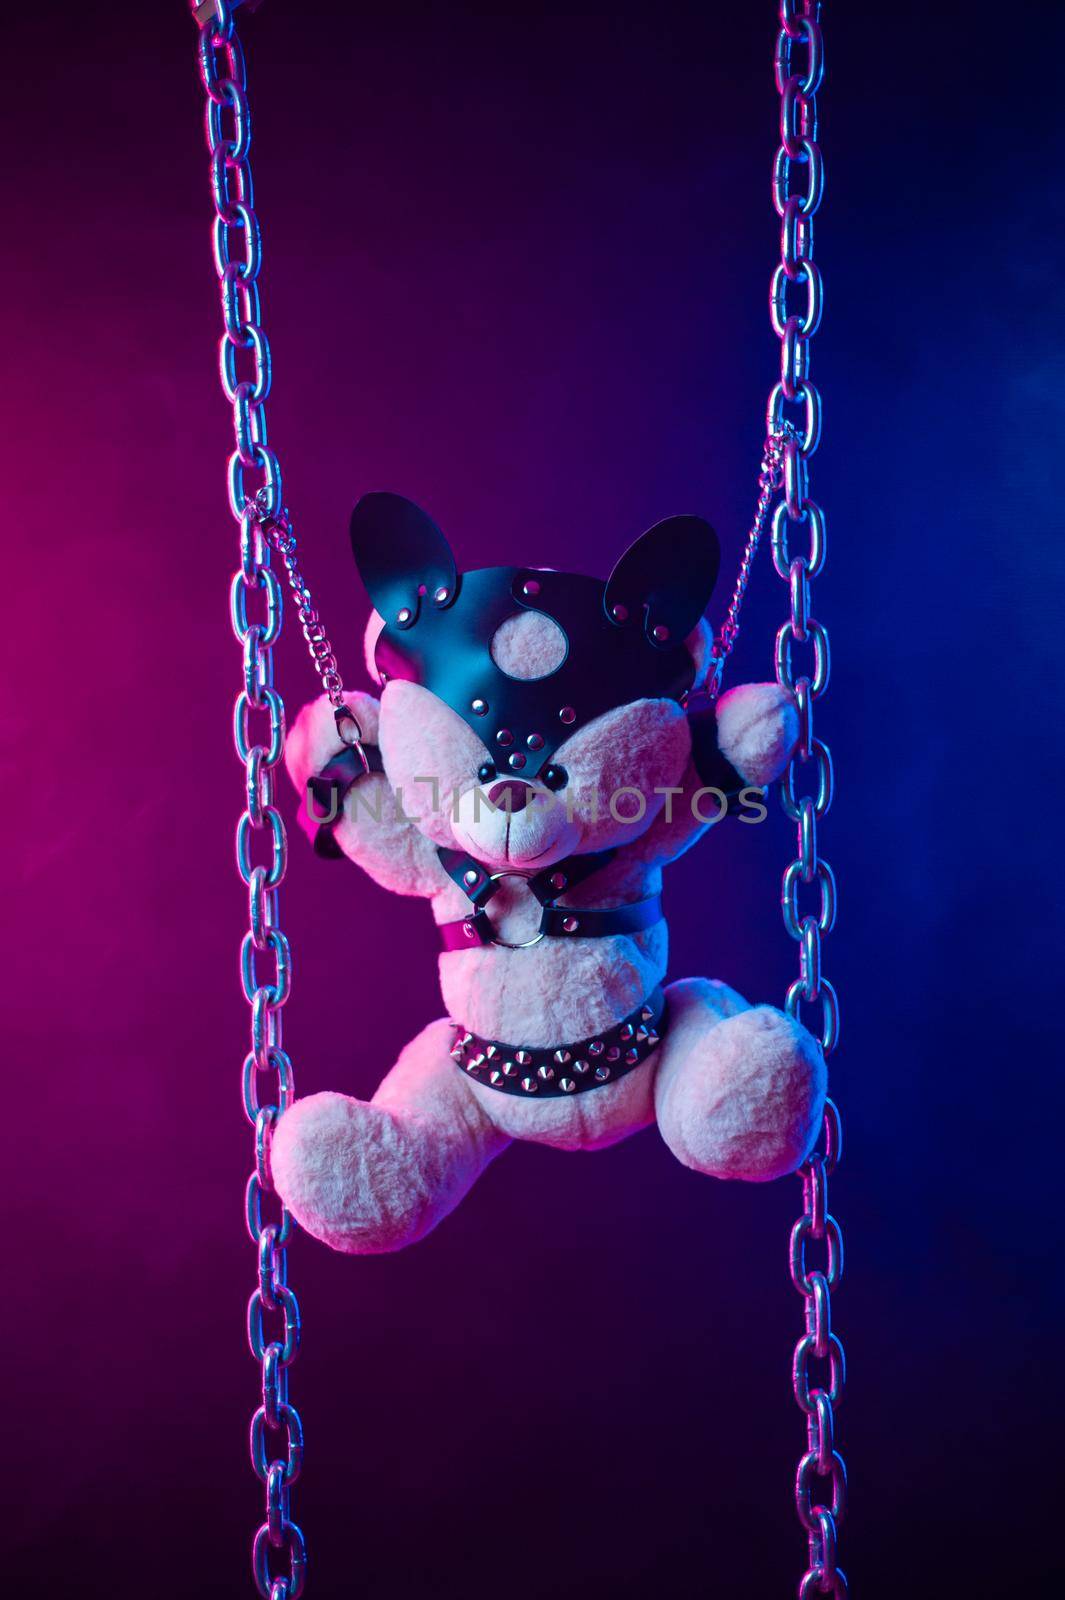 the toy bear dressed in leather belts harness accessory for BDSM games on a dark background in neon light